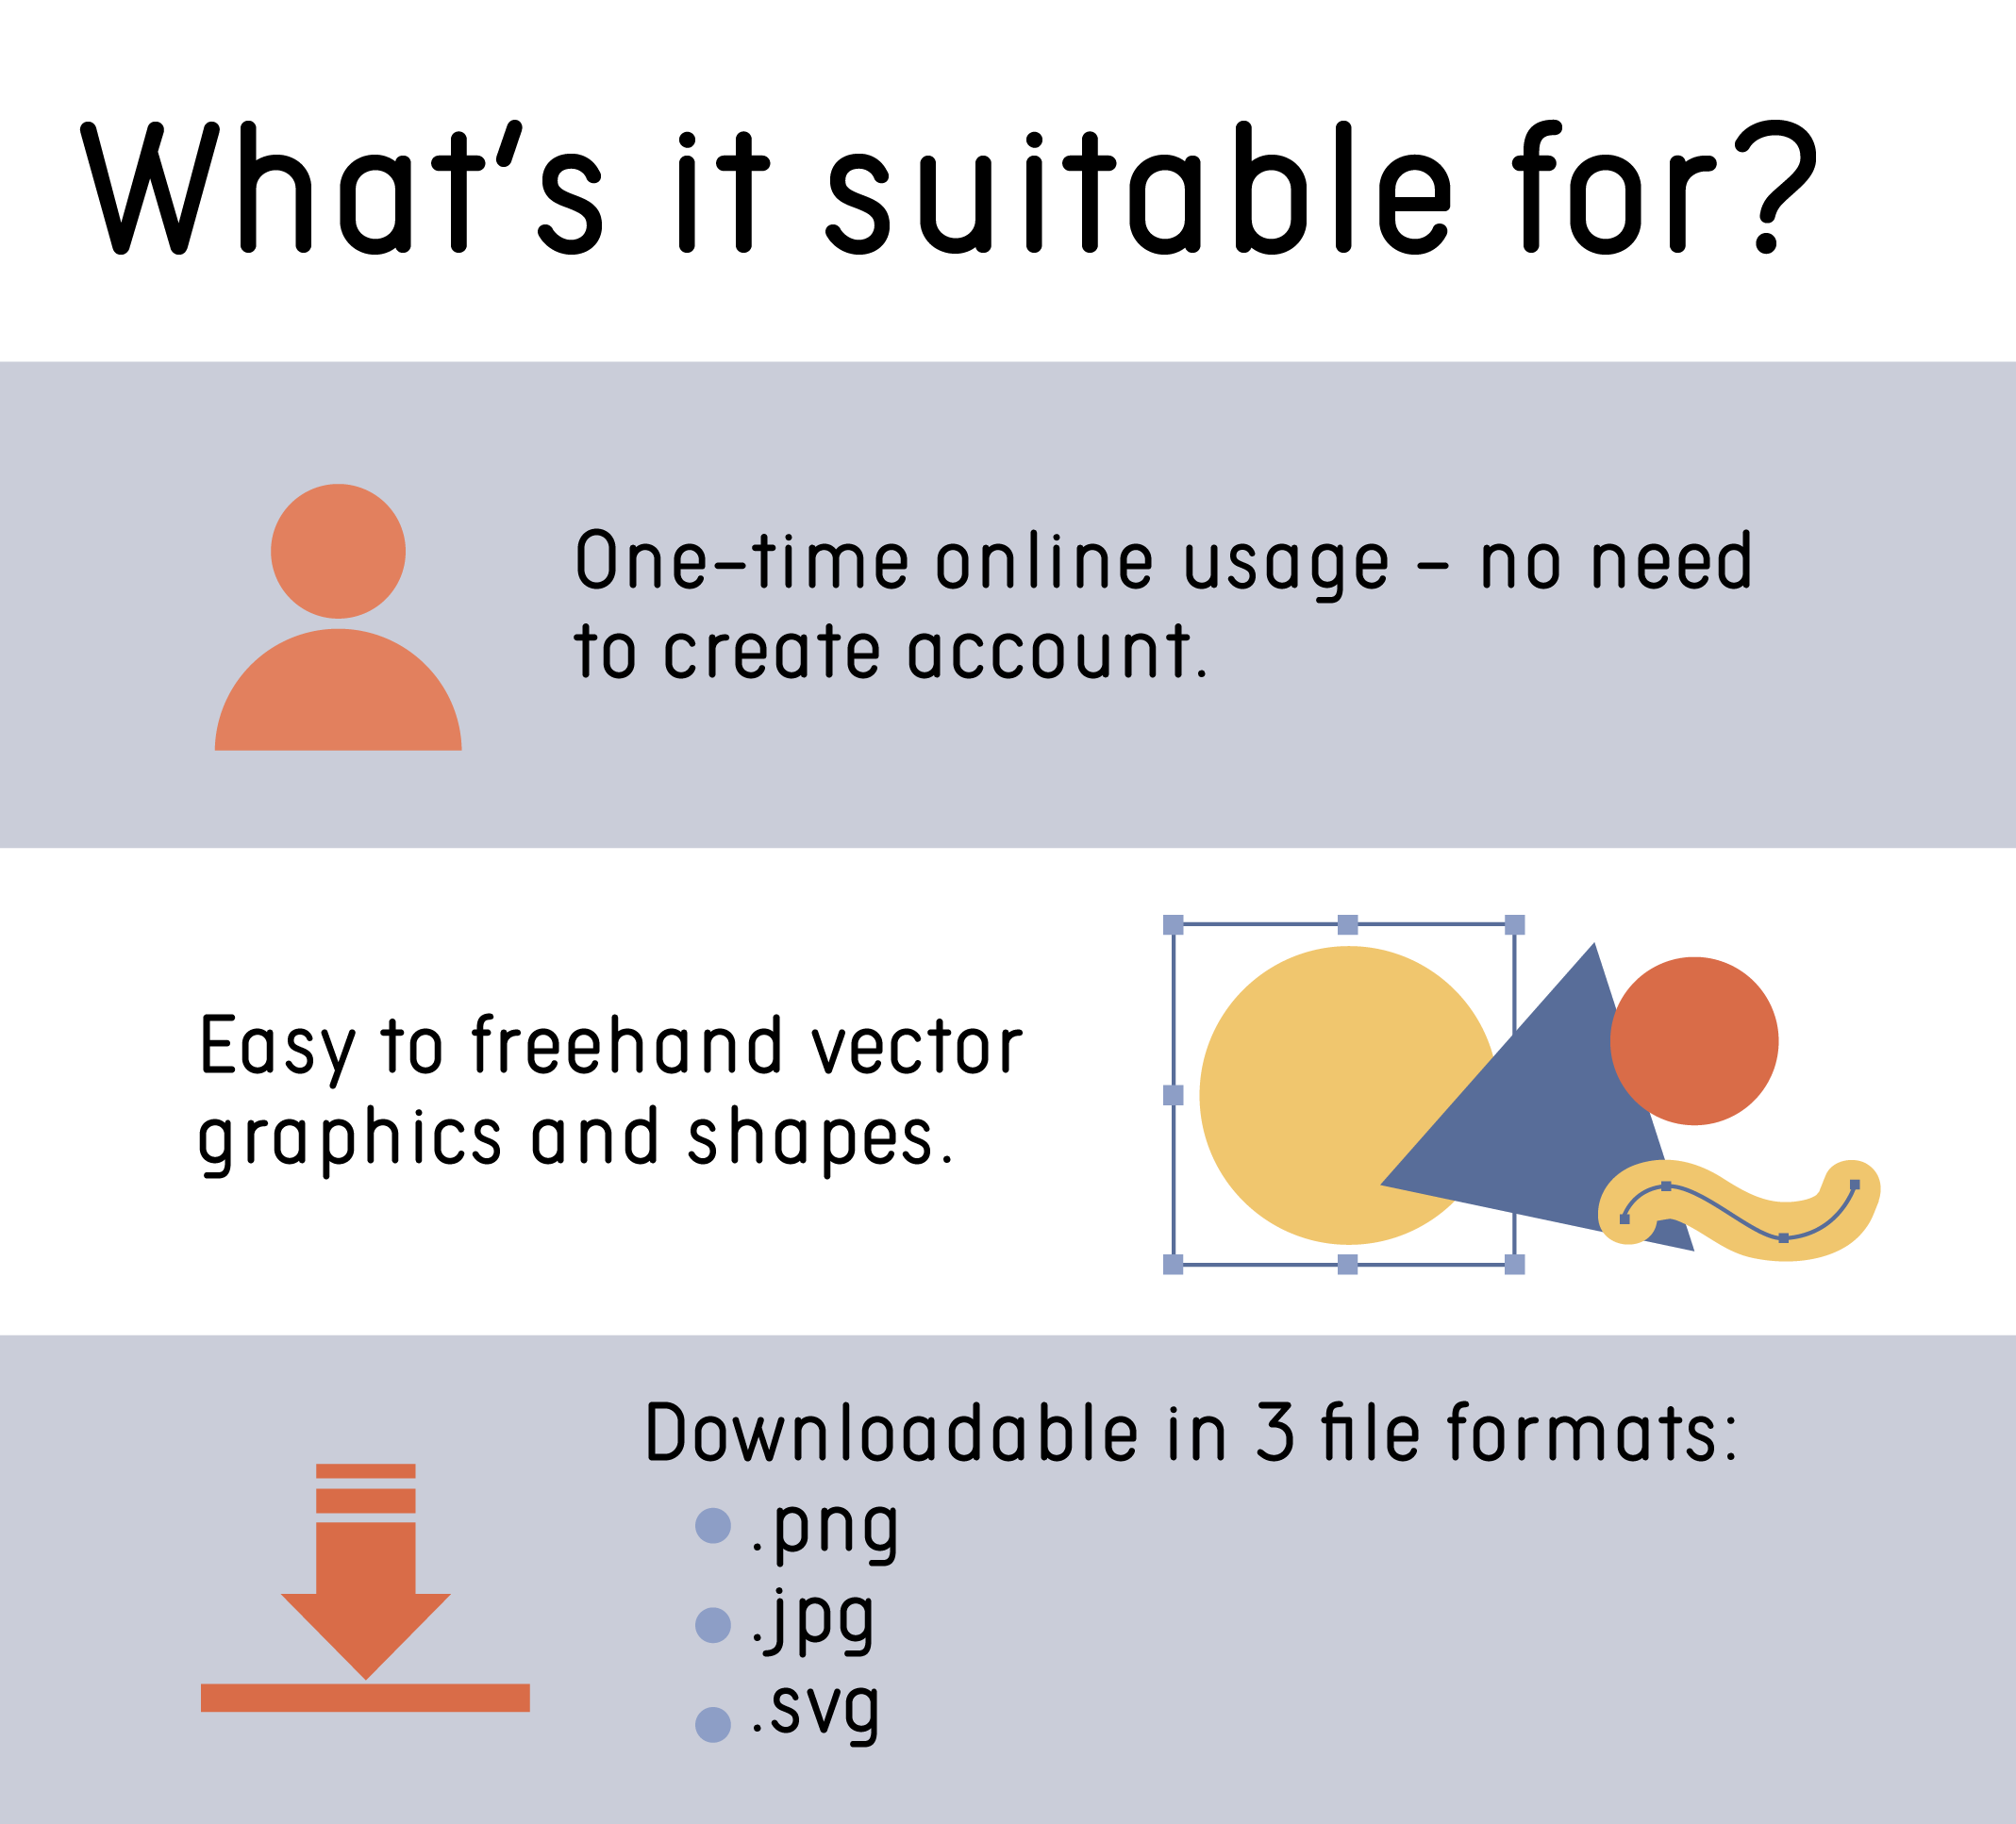 One-time online usage – no need to create account. Easy to freehand vector graphics and shapes. Downloadable in 3 file formats - .png, .jpg, .svg.